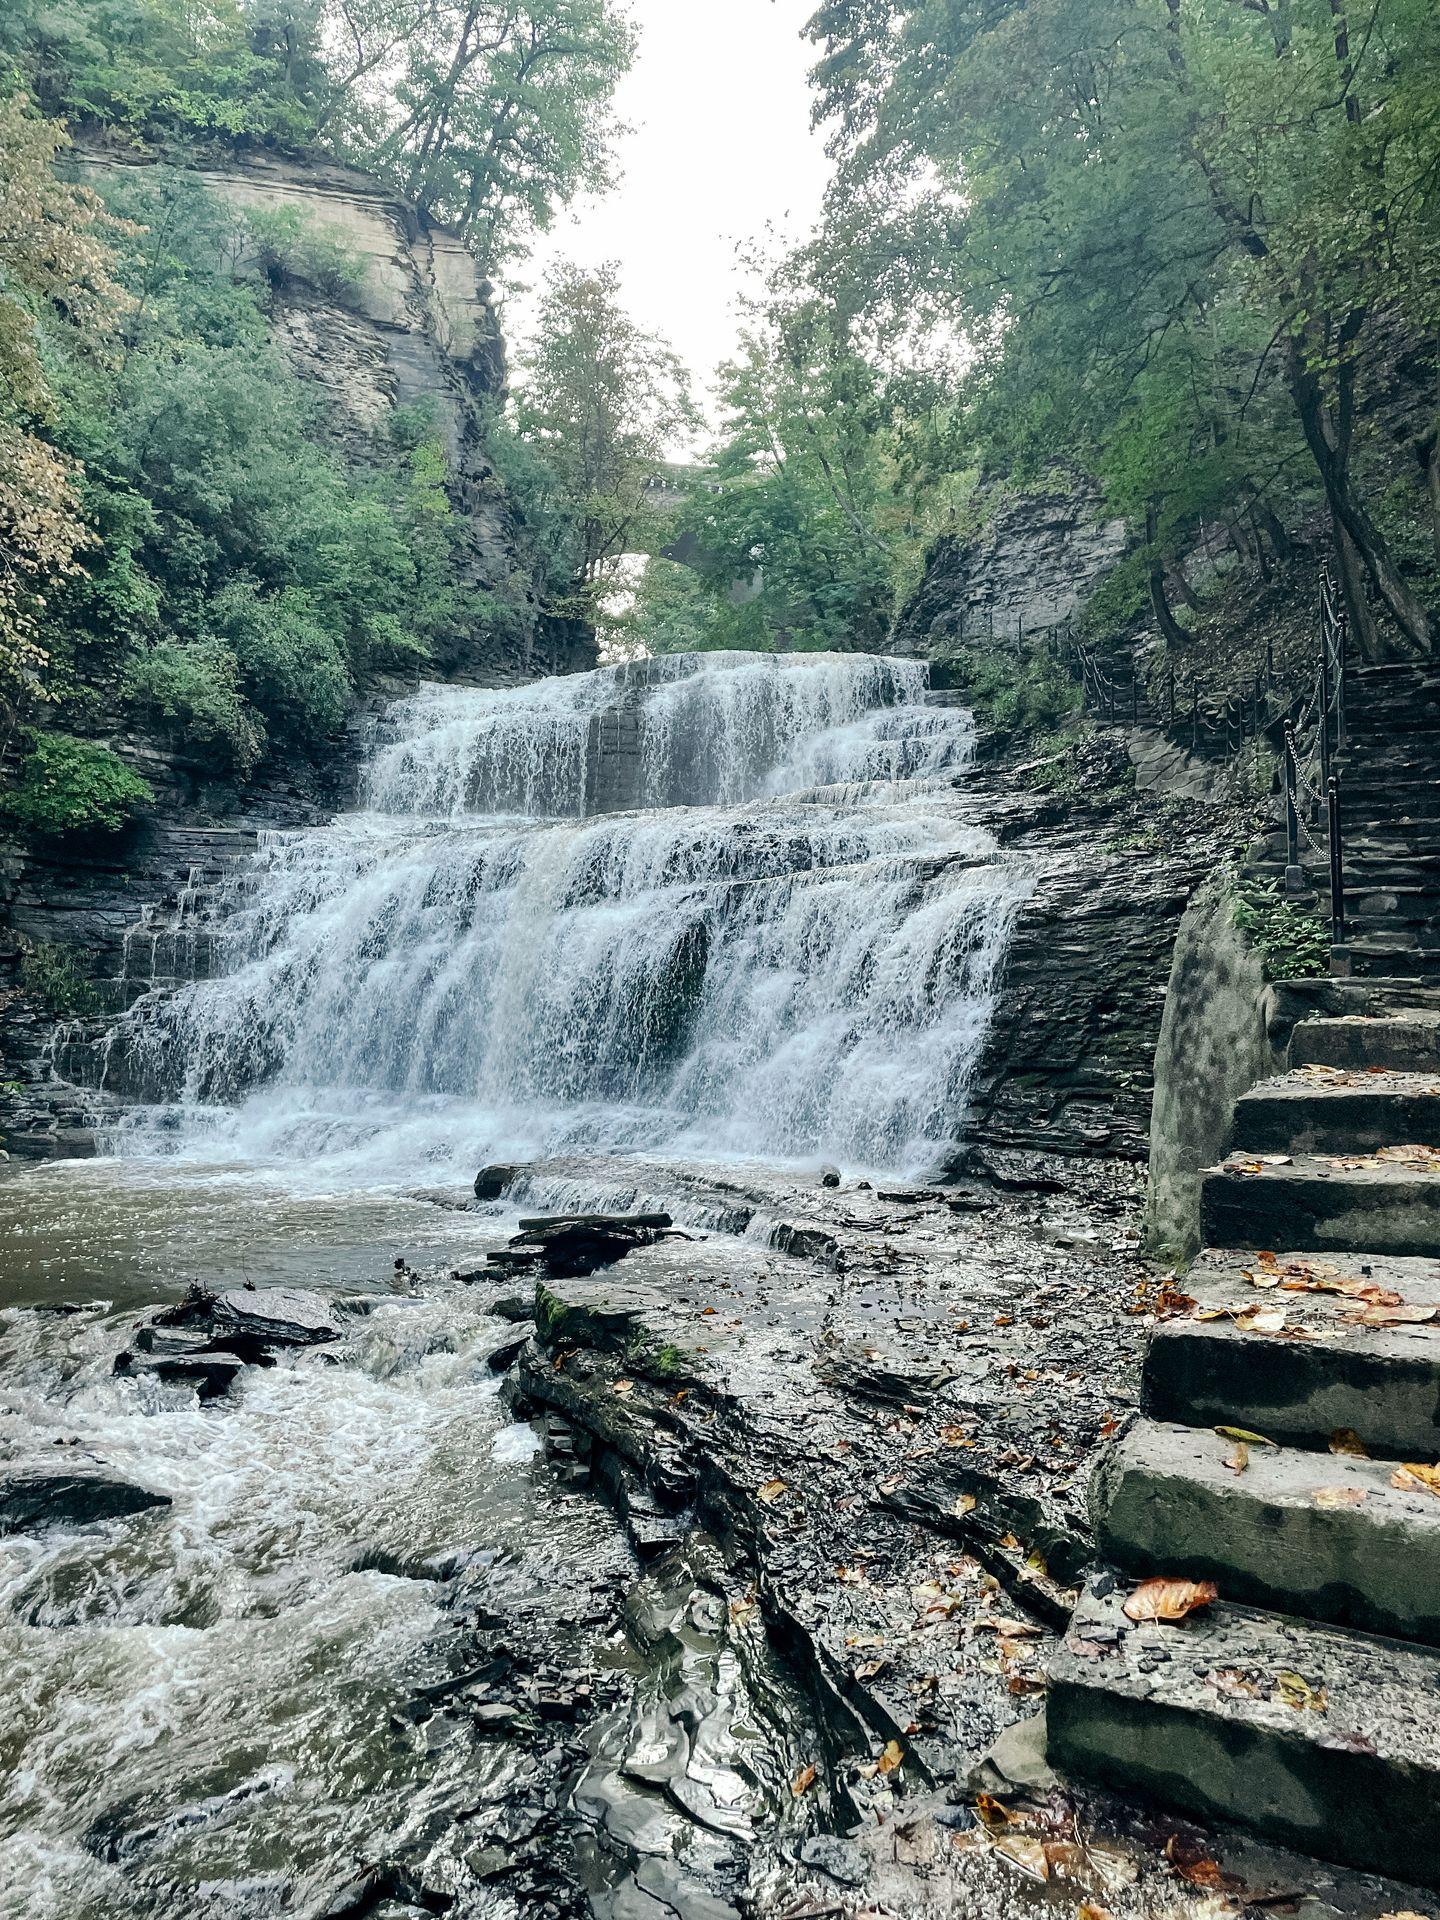 A waterfall with stone steps climbing up next to it in Cascadilla Gorge.